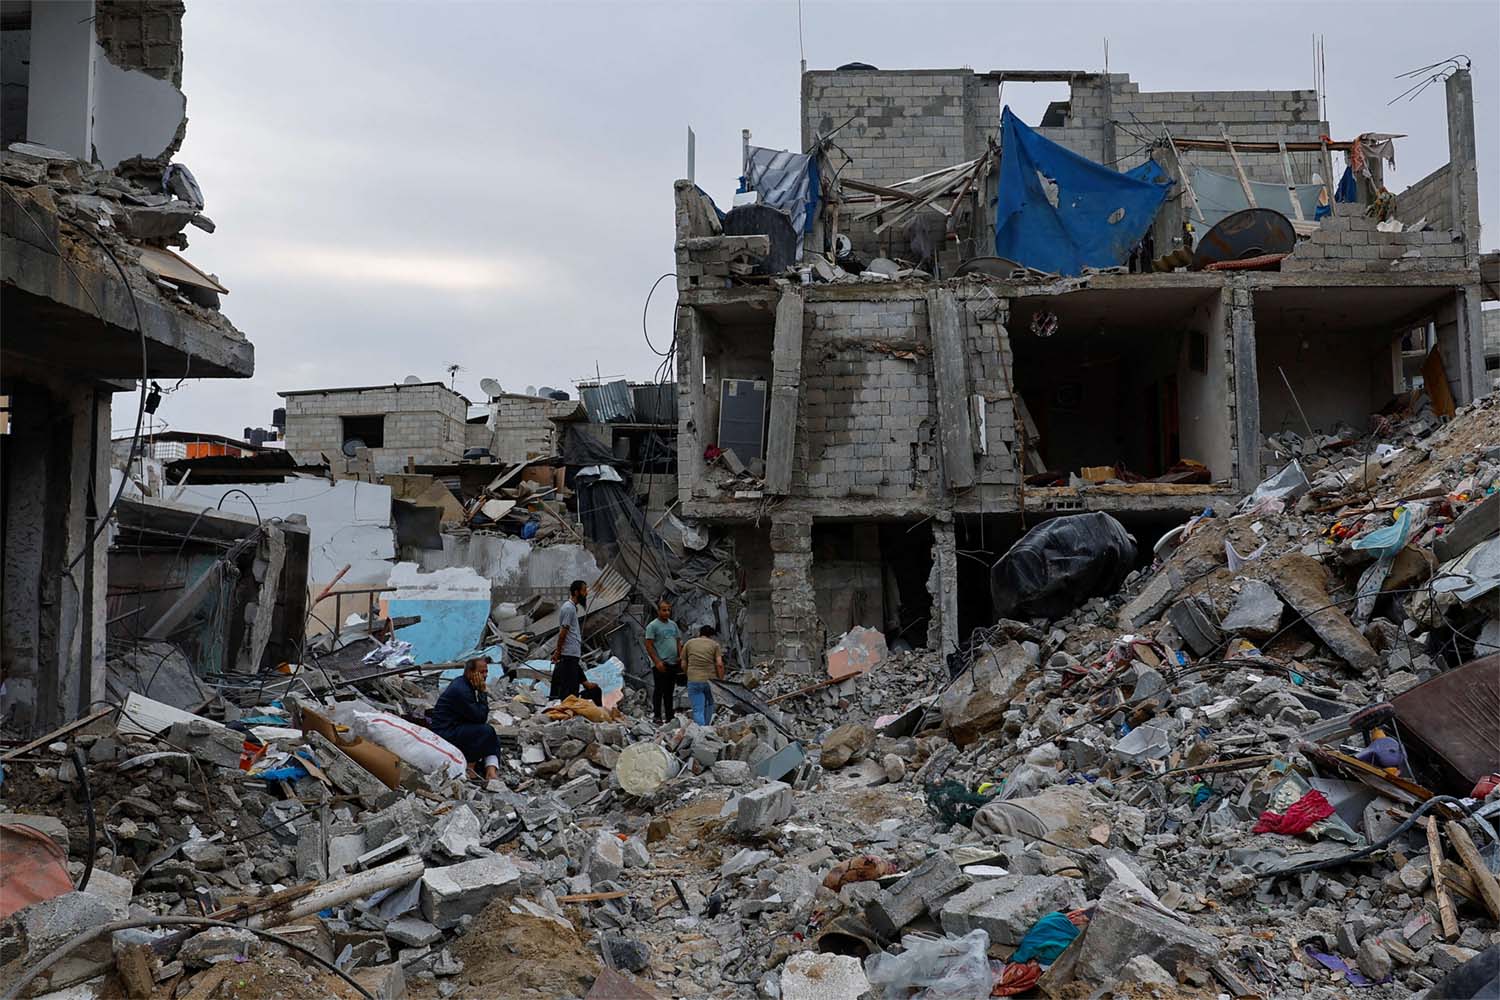 Buildings in Gaza have been flattened by Israel's air strikes